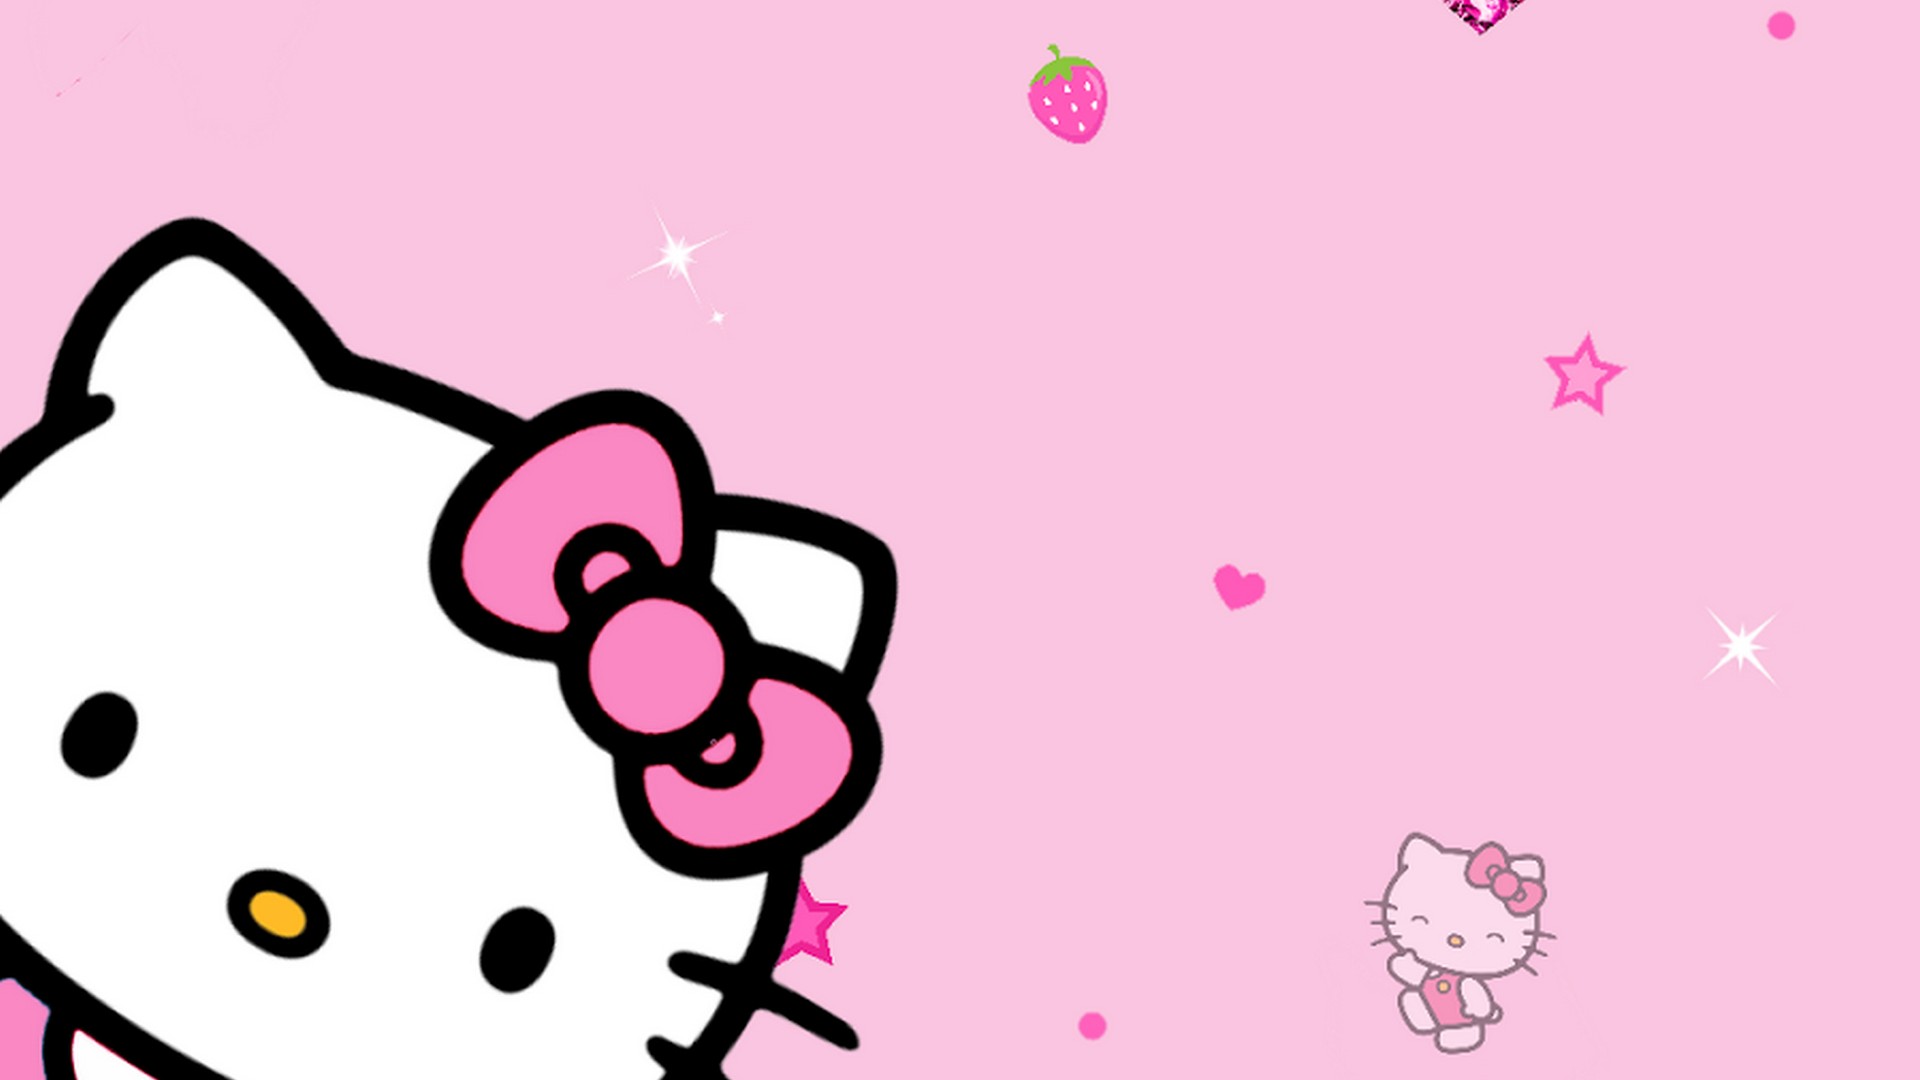 Wallpaper HD Kitty With Resolution 1920X1080 pixel. You can make this wallpaper for your Desktop Computer Backgrounds, Mac Wallpapers, Android Lock screen or iPhone Screensavers